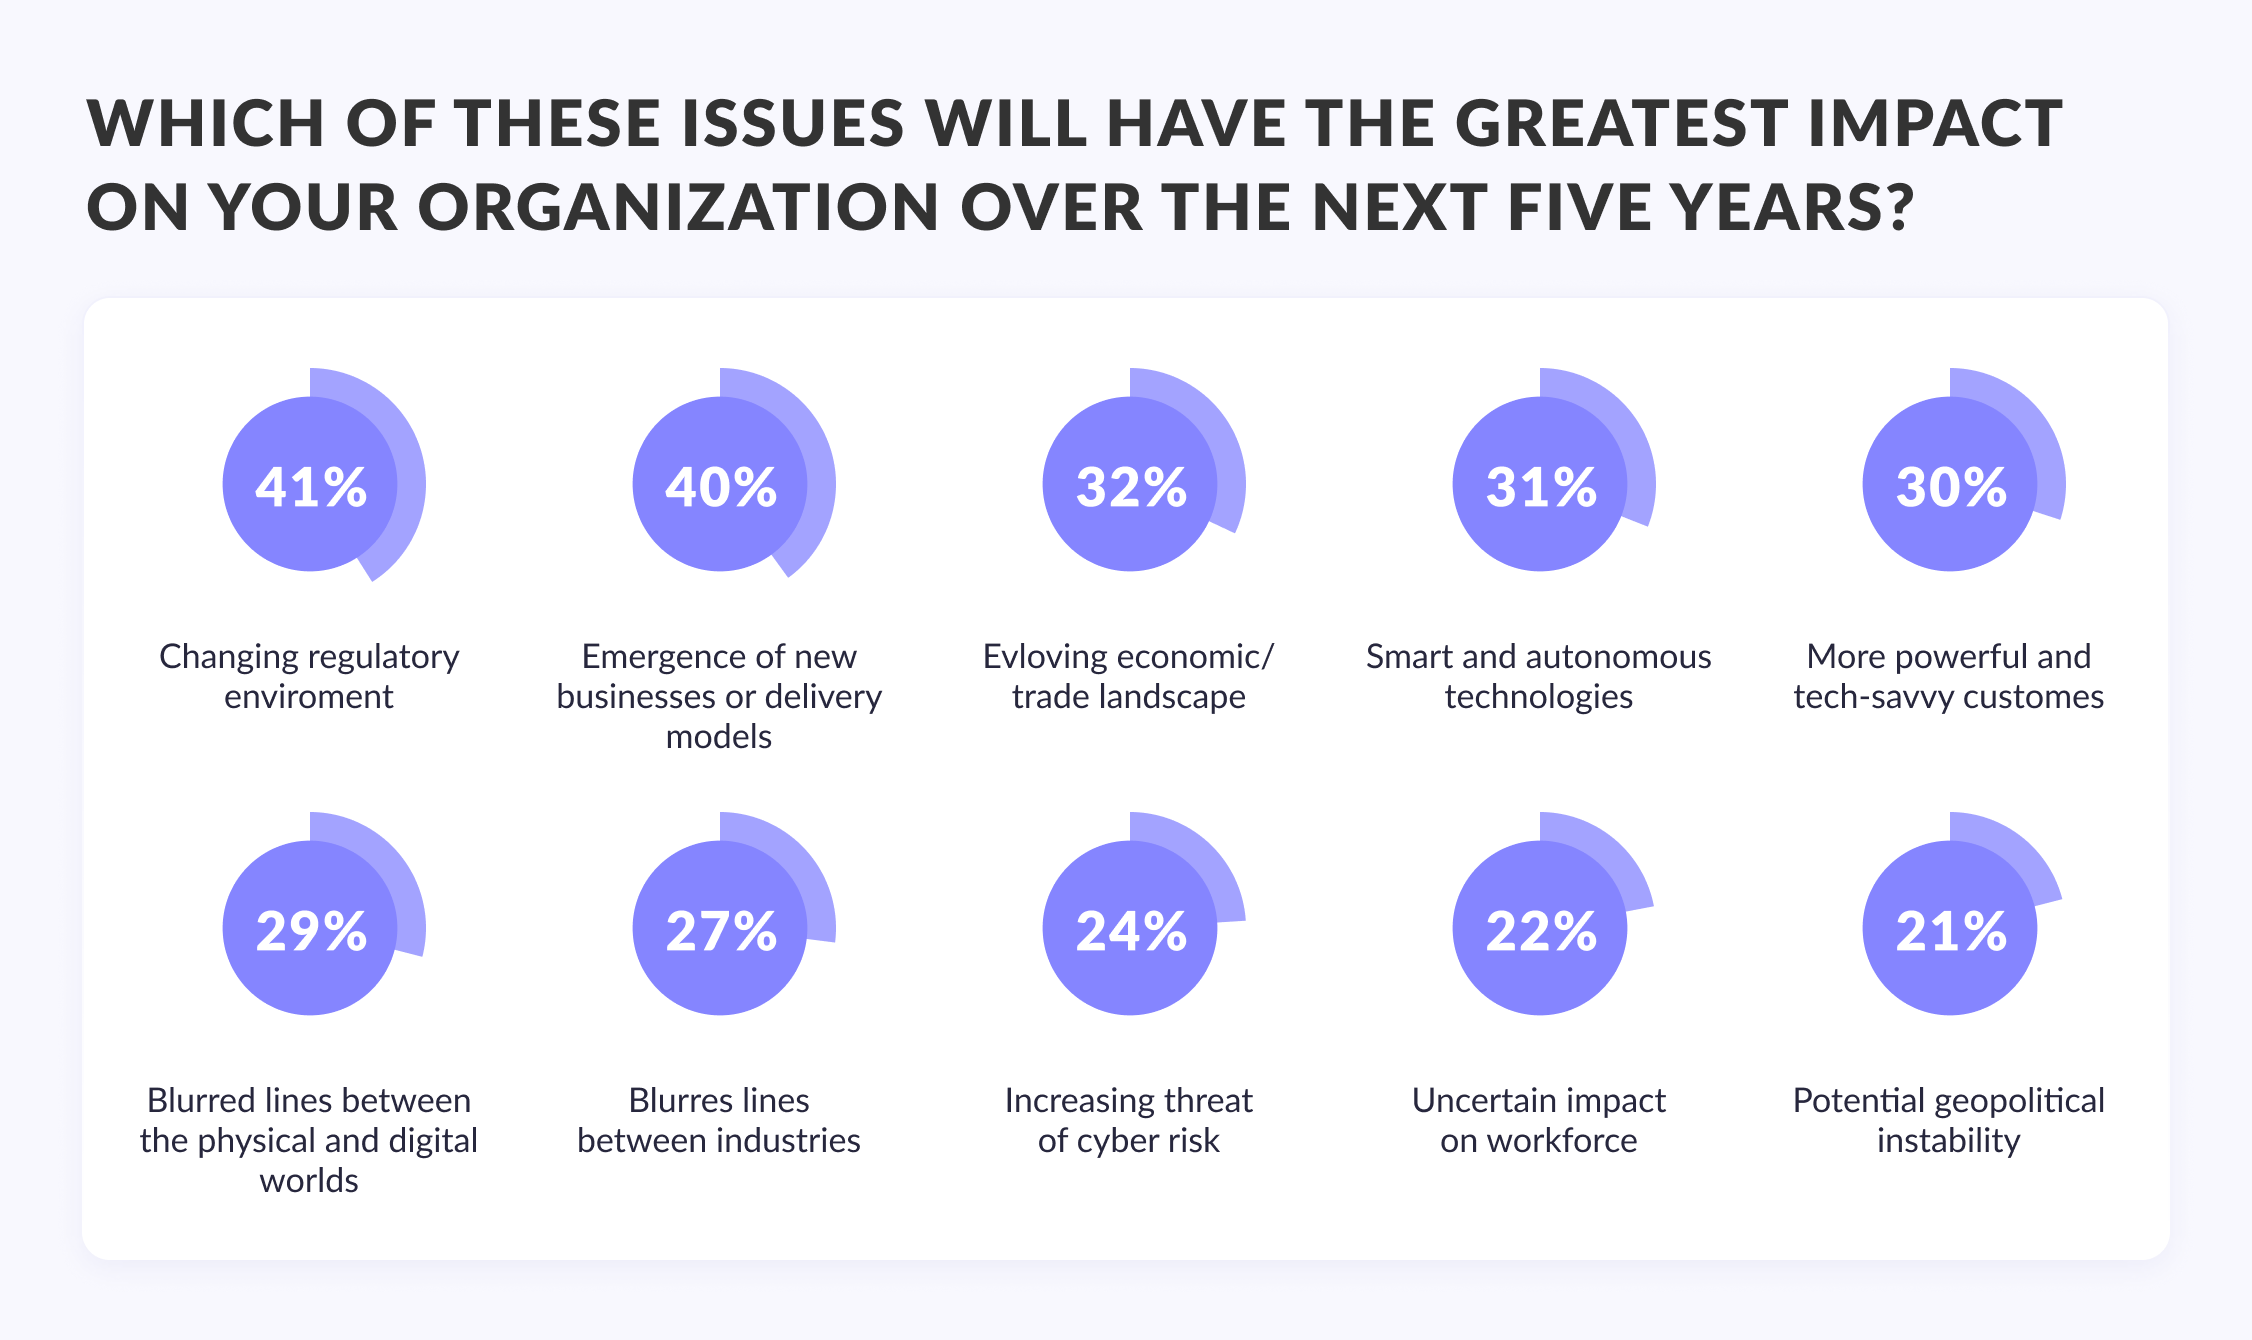 What will have an impact on your organization